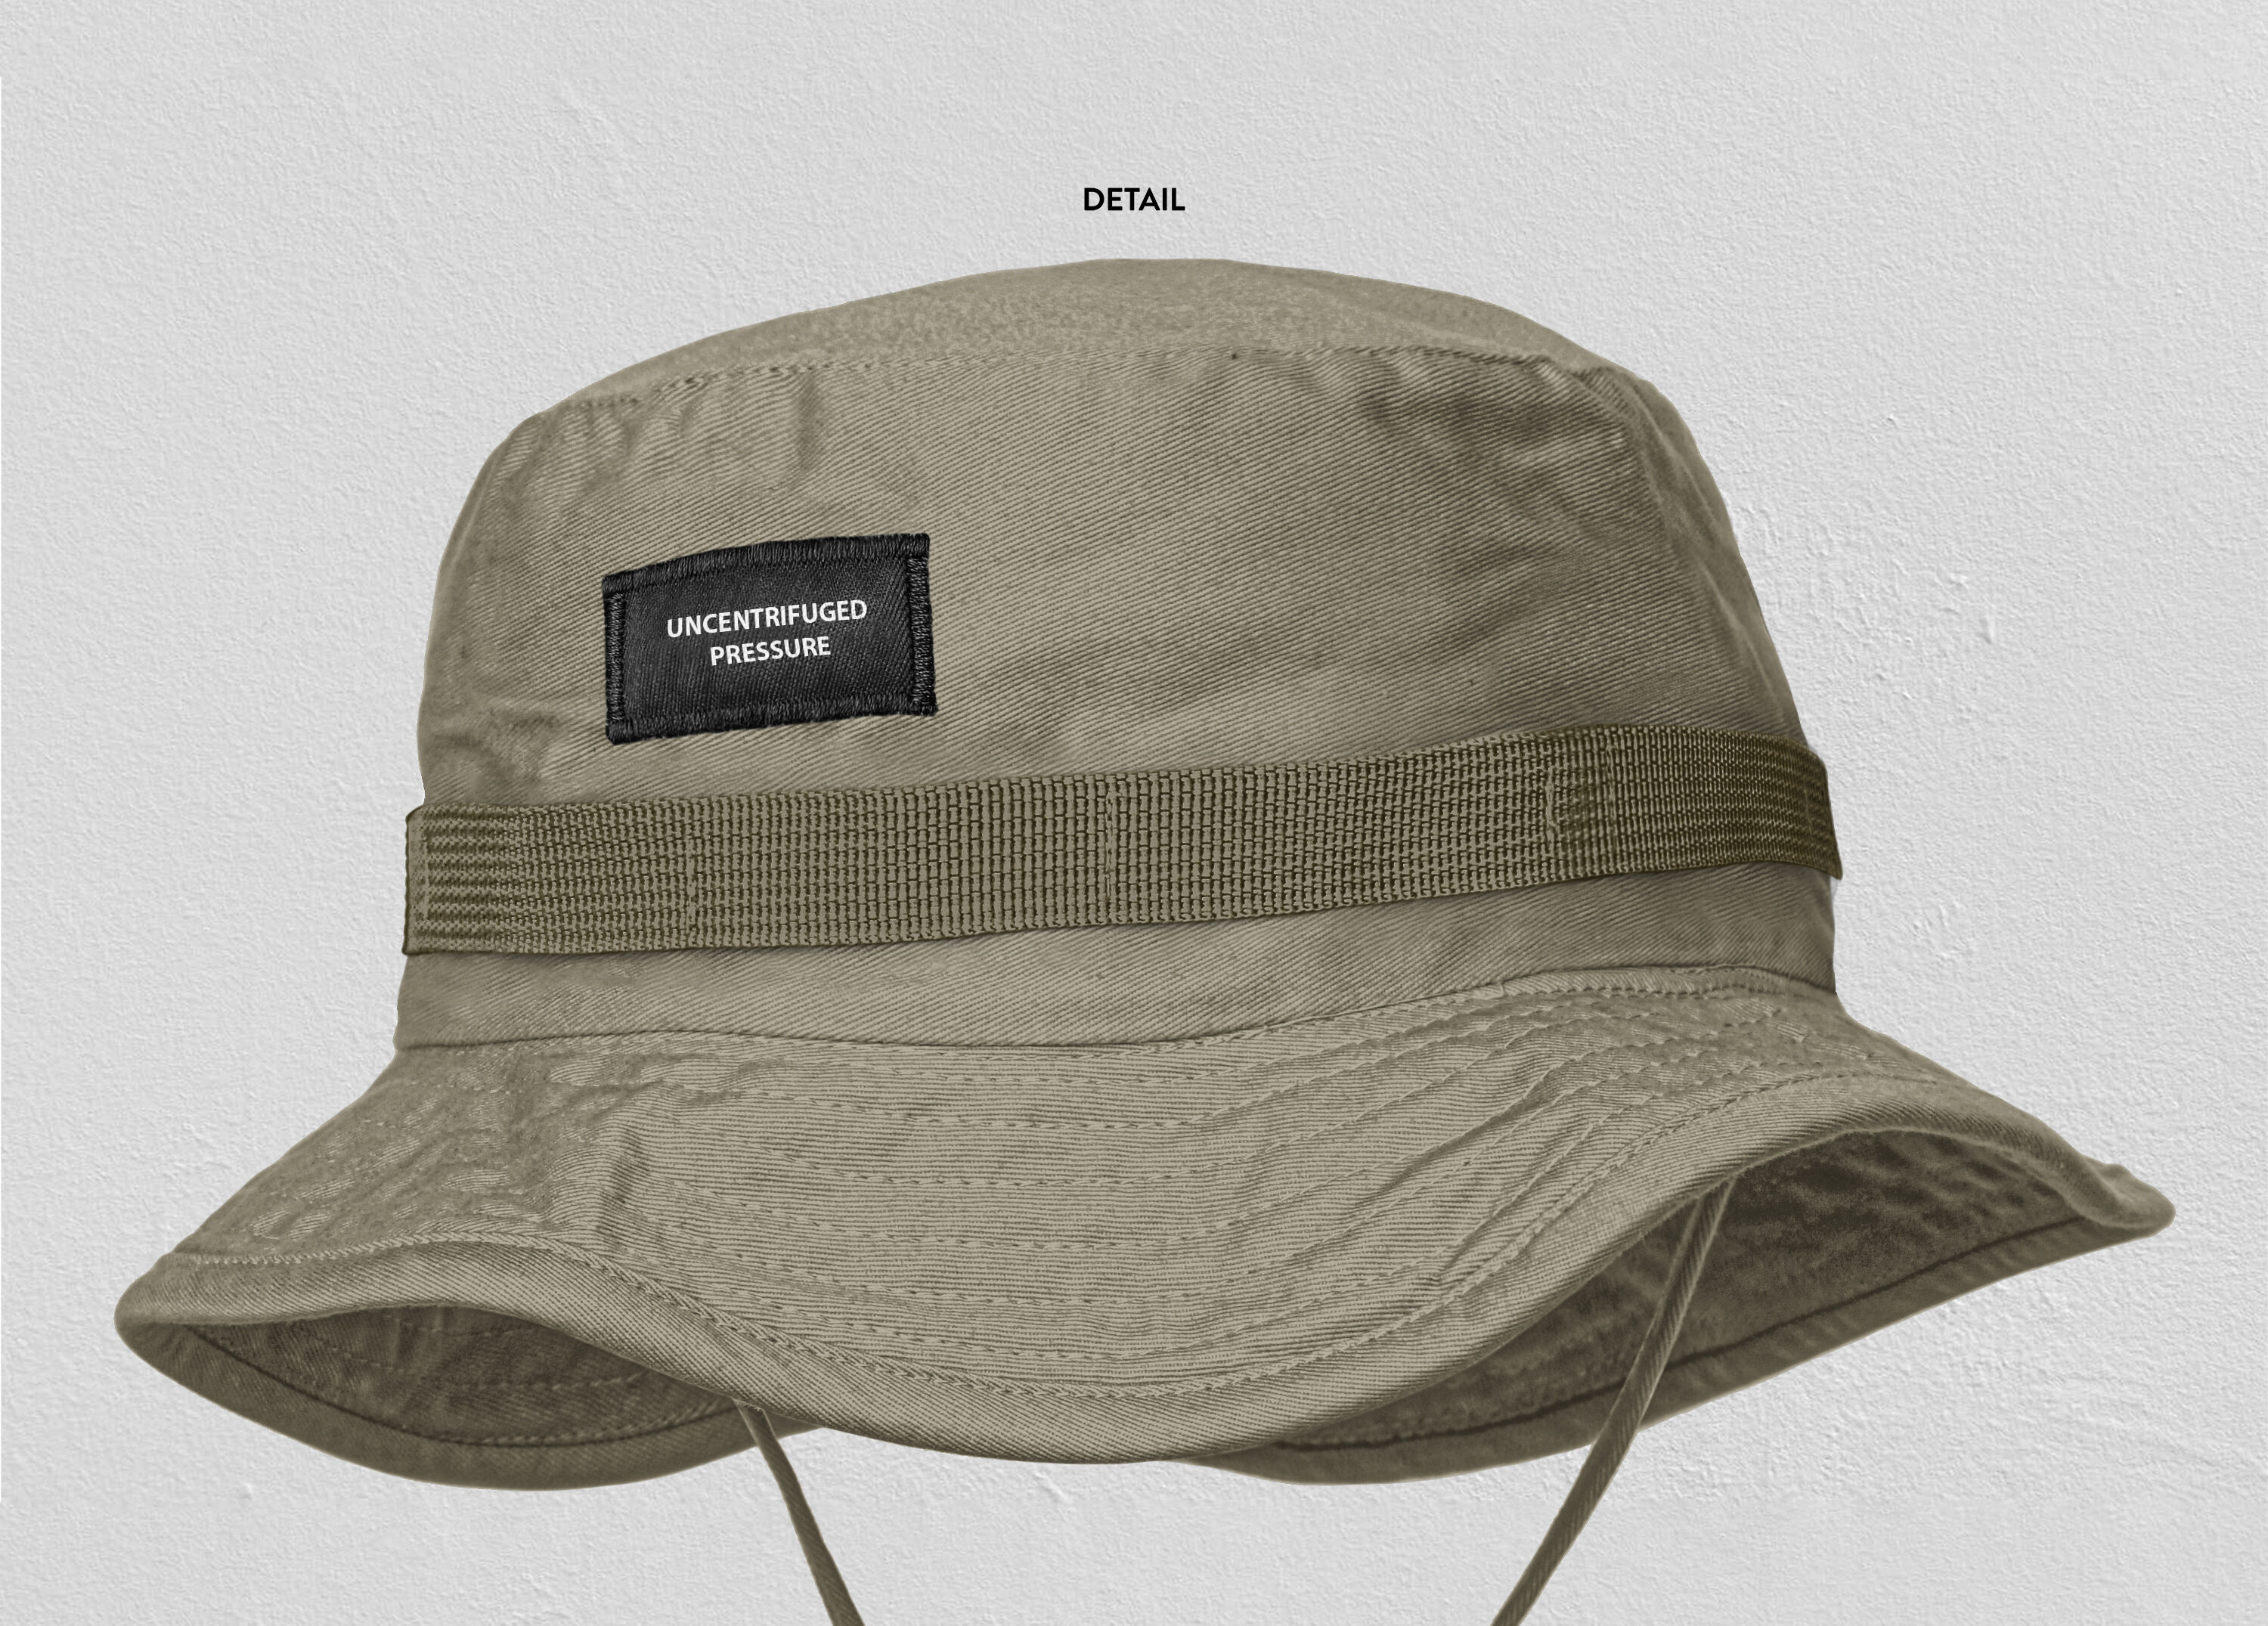 Download Bucket Hat Mockup By Uncentrifuged Pressure | TheHungryJPEG.com